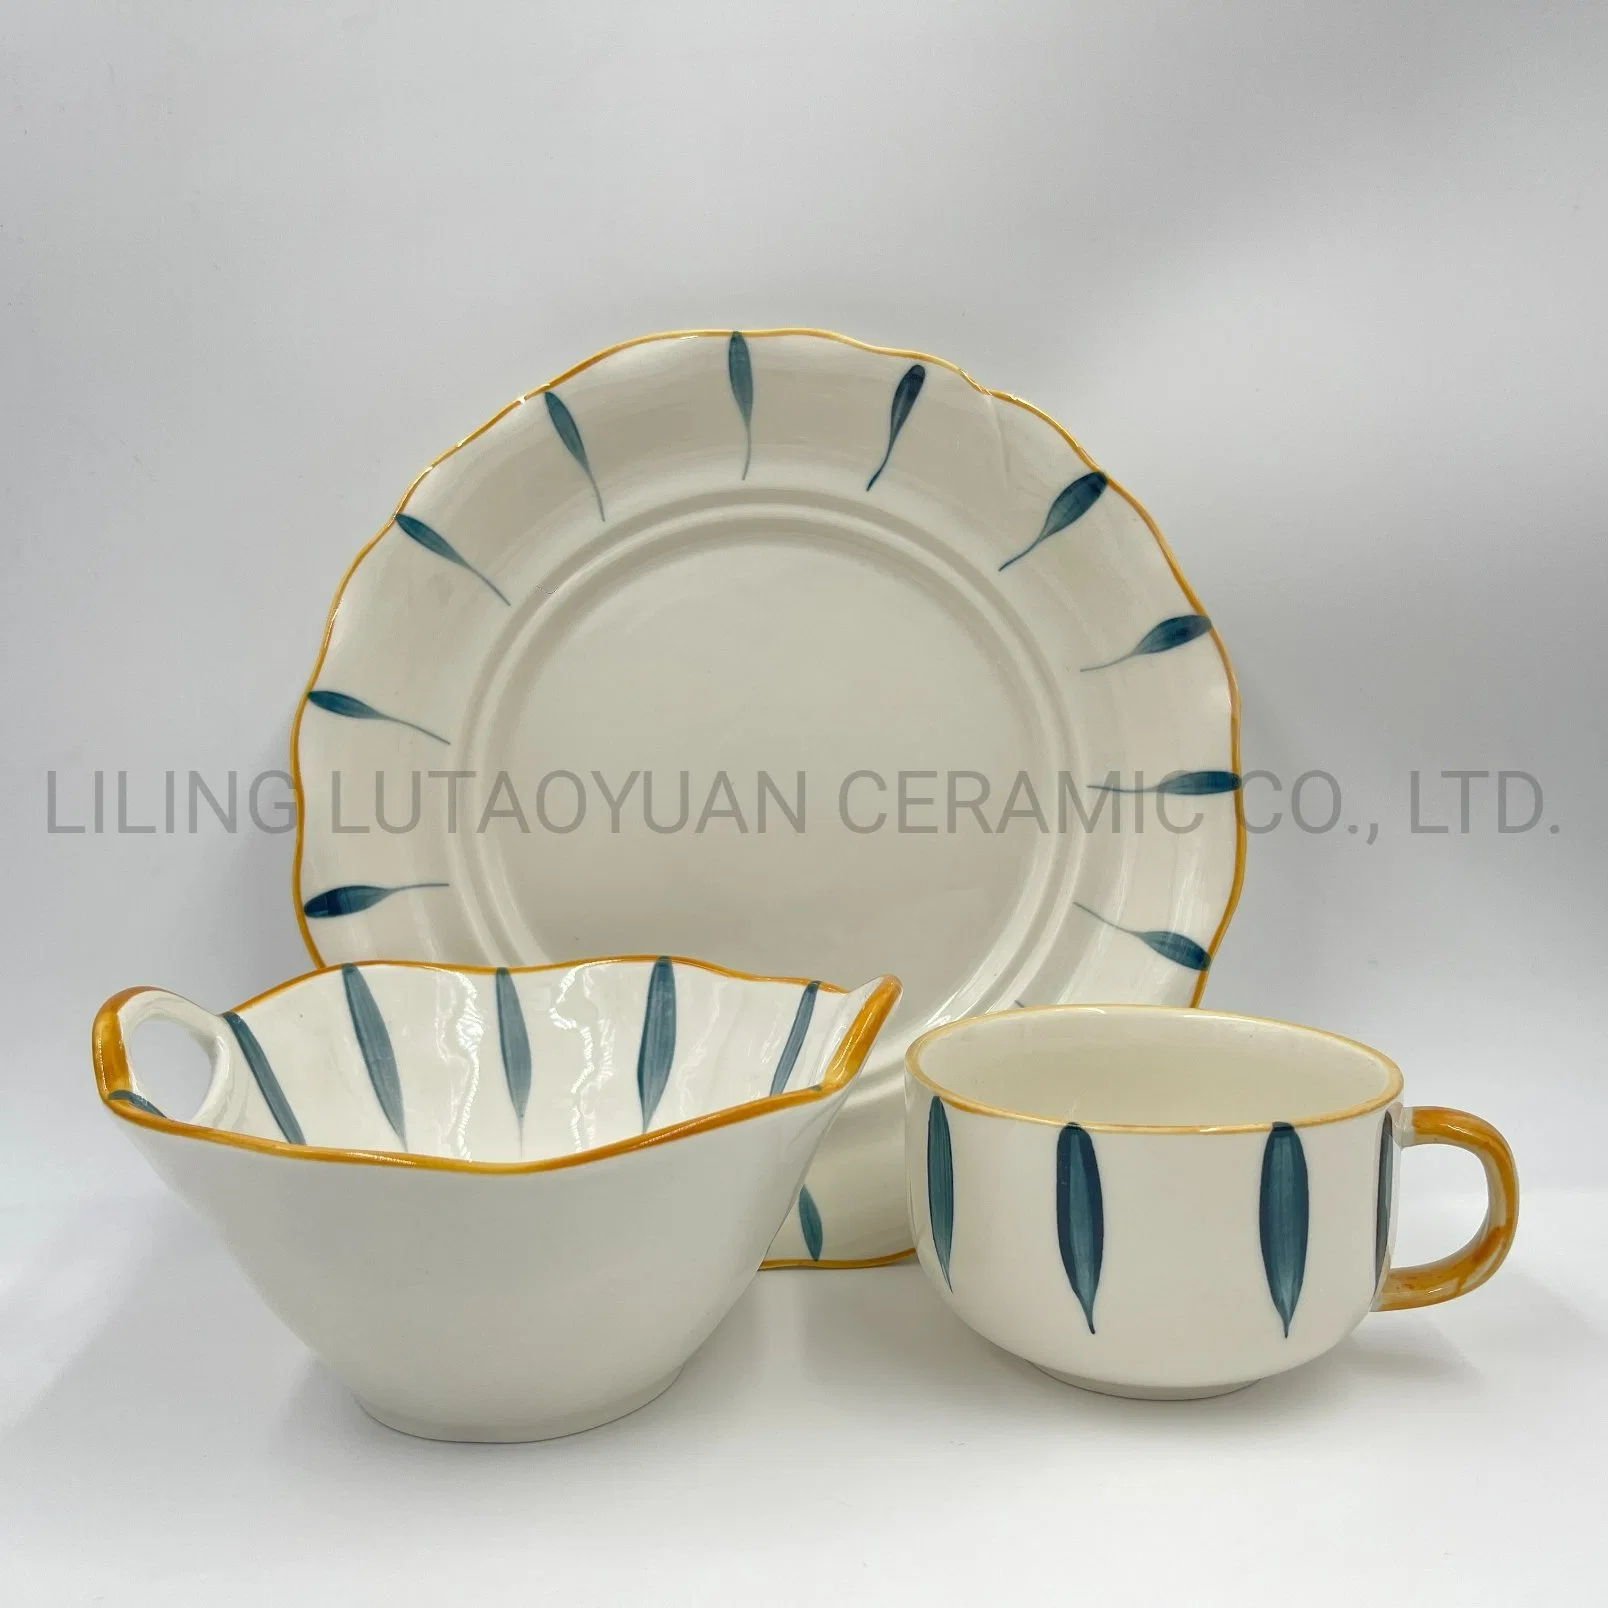 Porcelain New Bone China Colored Promotion Stoneware Tableware Ceramic Dinner Set for Wedding Banquet Restaurant with Customized Color Pattern Logo and Designs